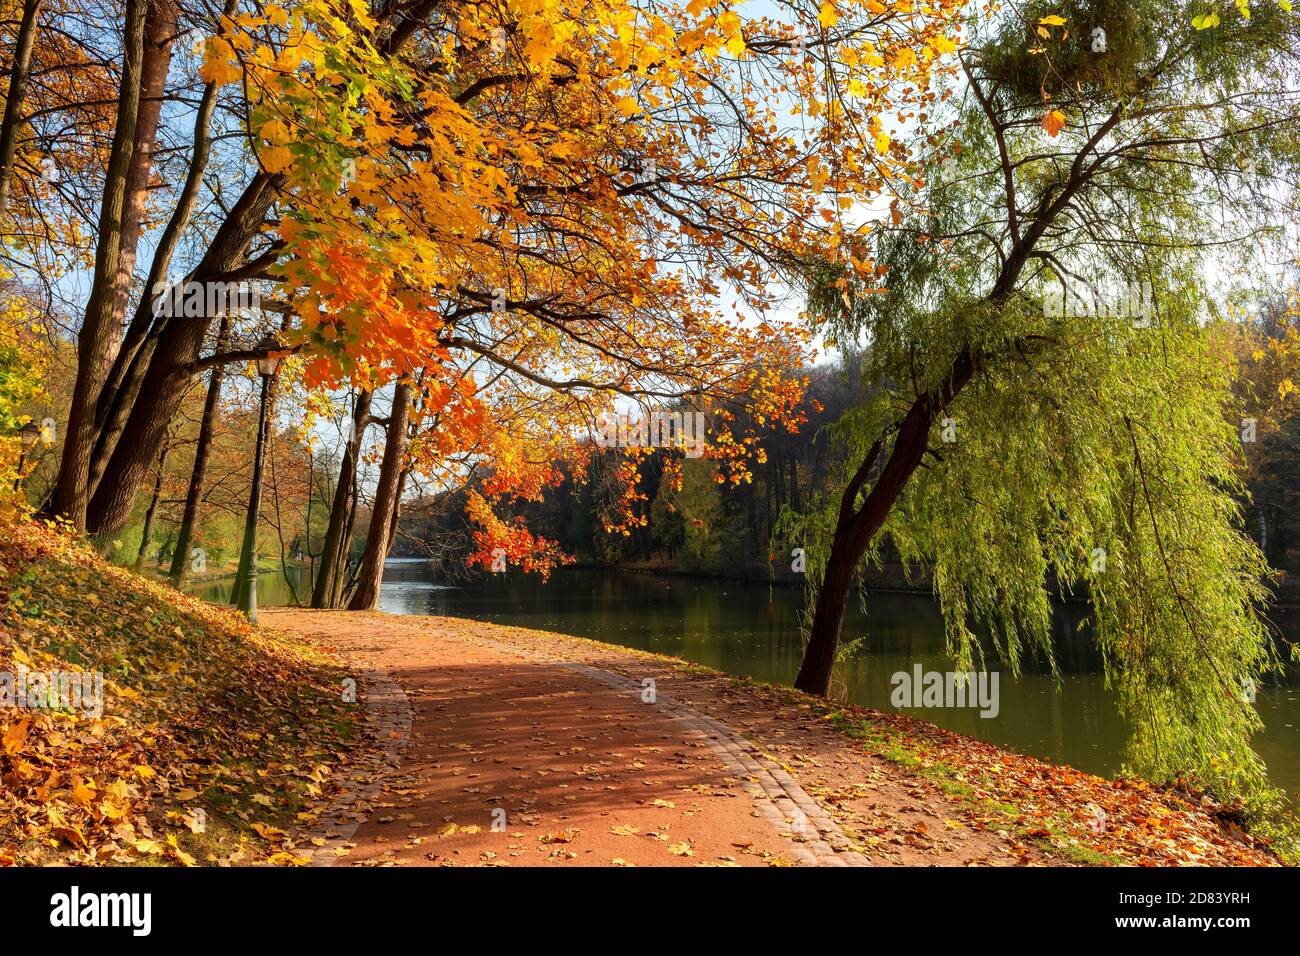 Autumn alley in a park with colorful leaves Stock Photo